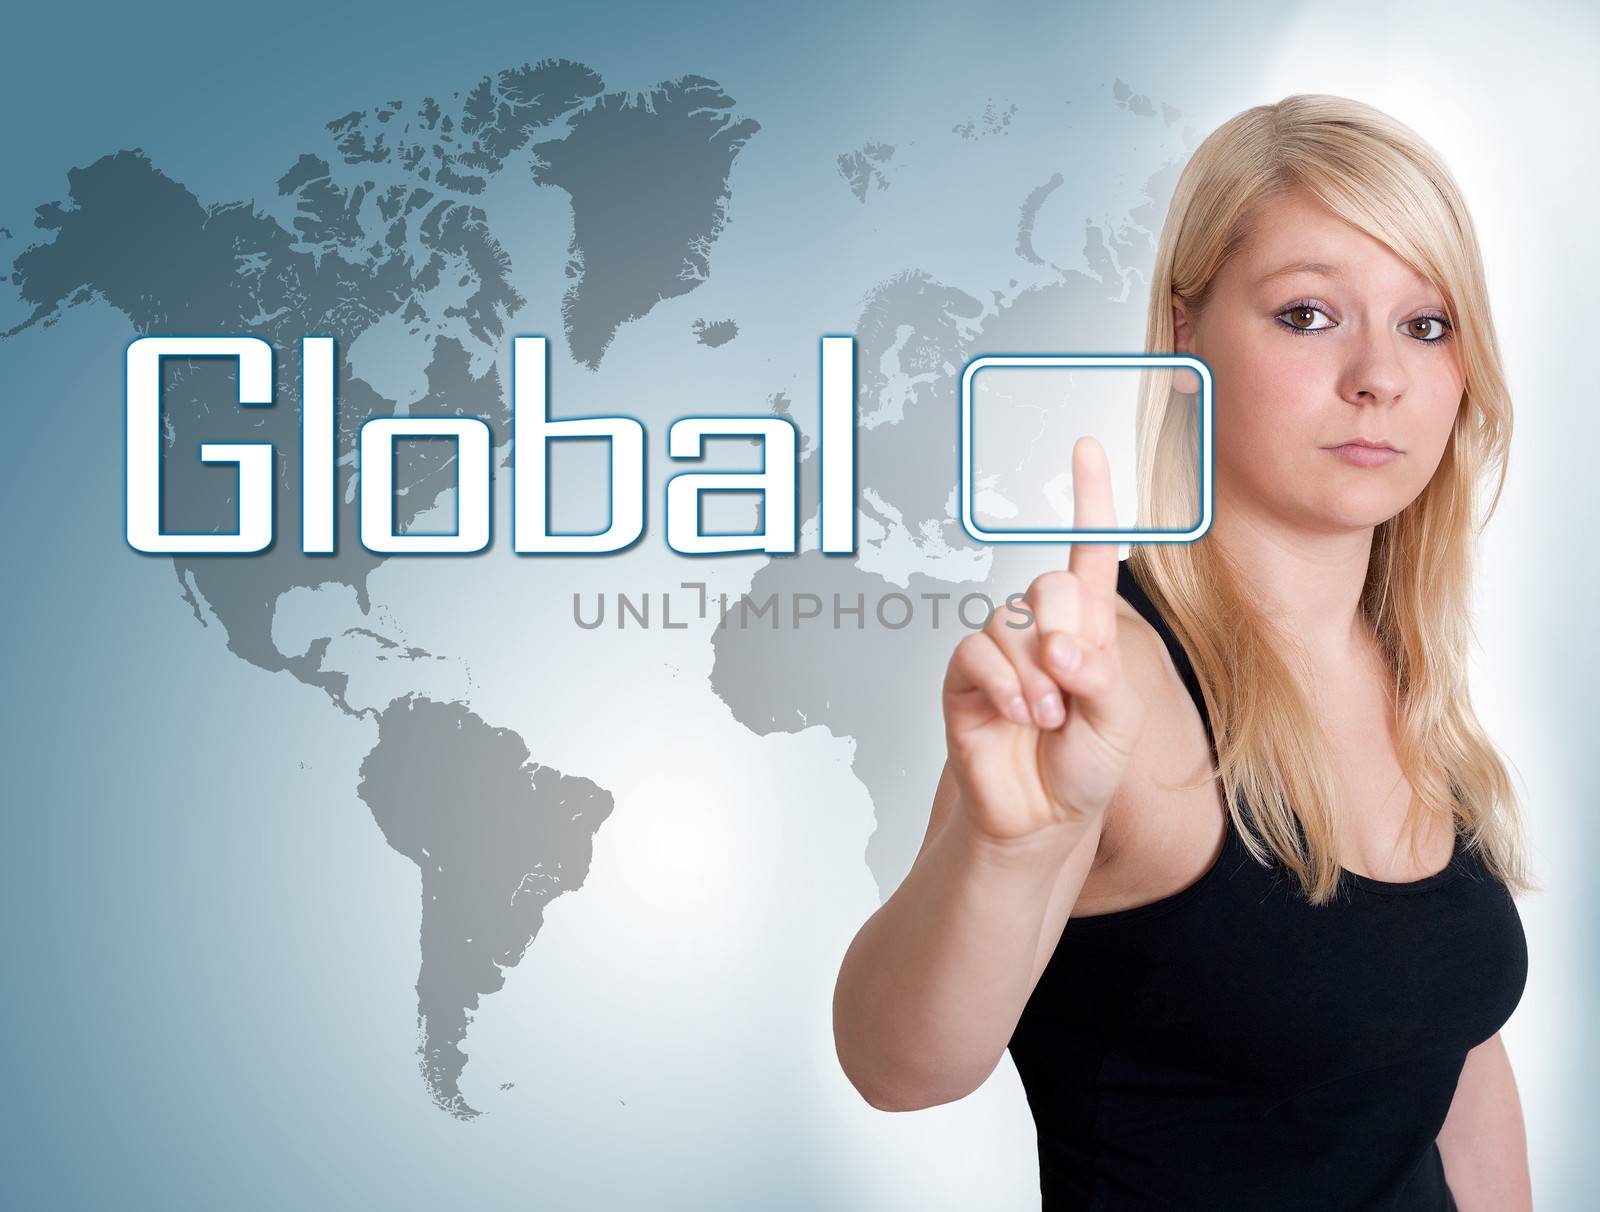 Young woman press digital Global button on interface in front of her